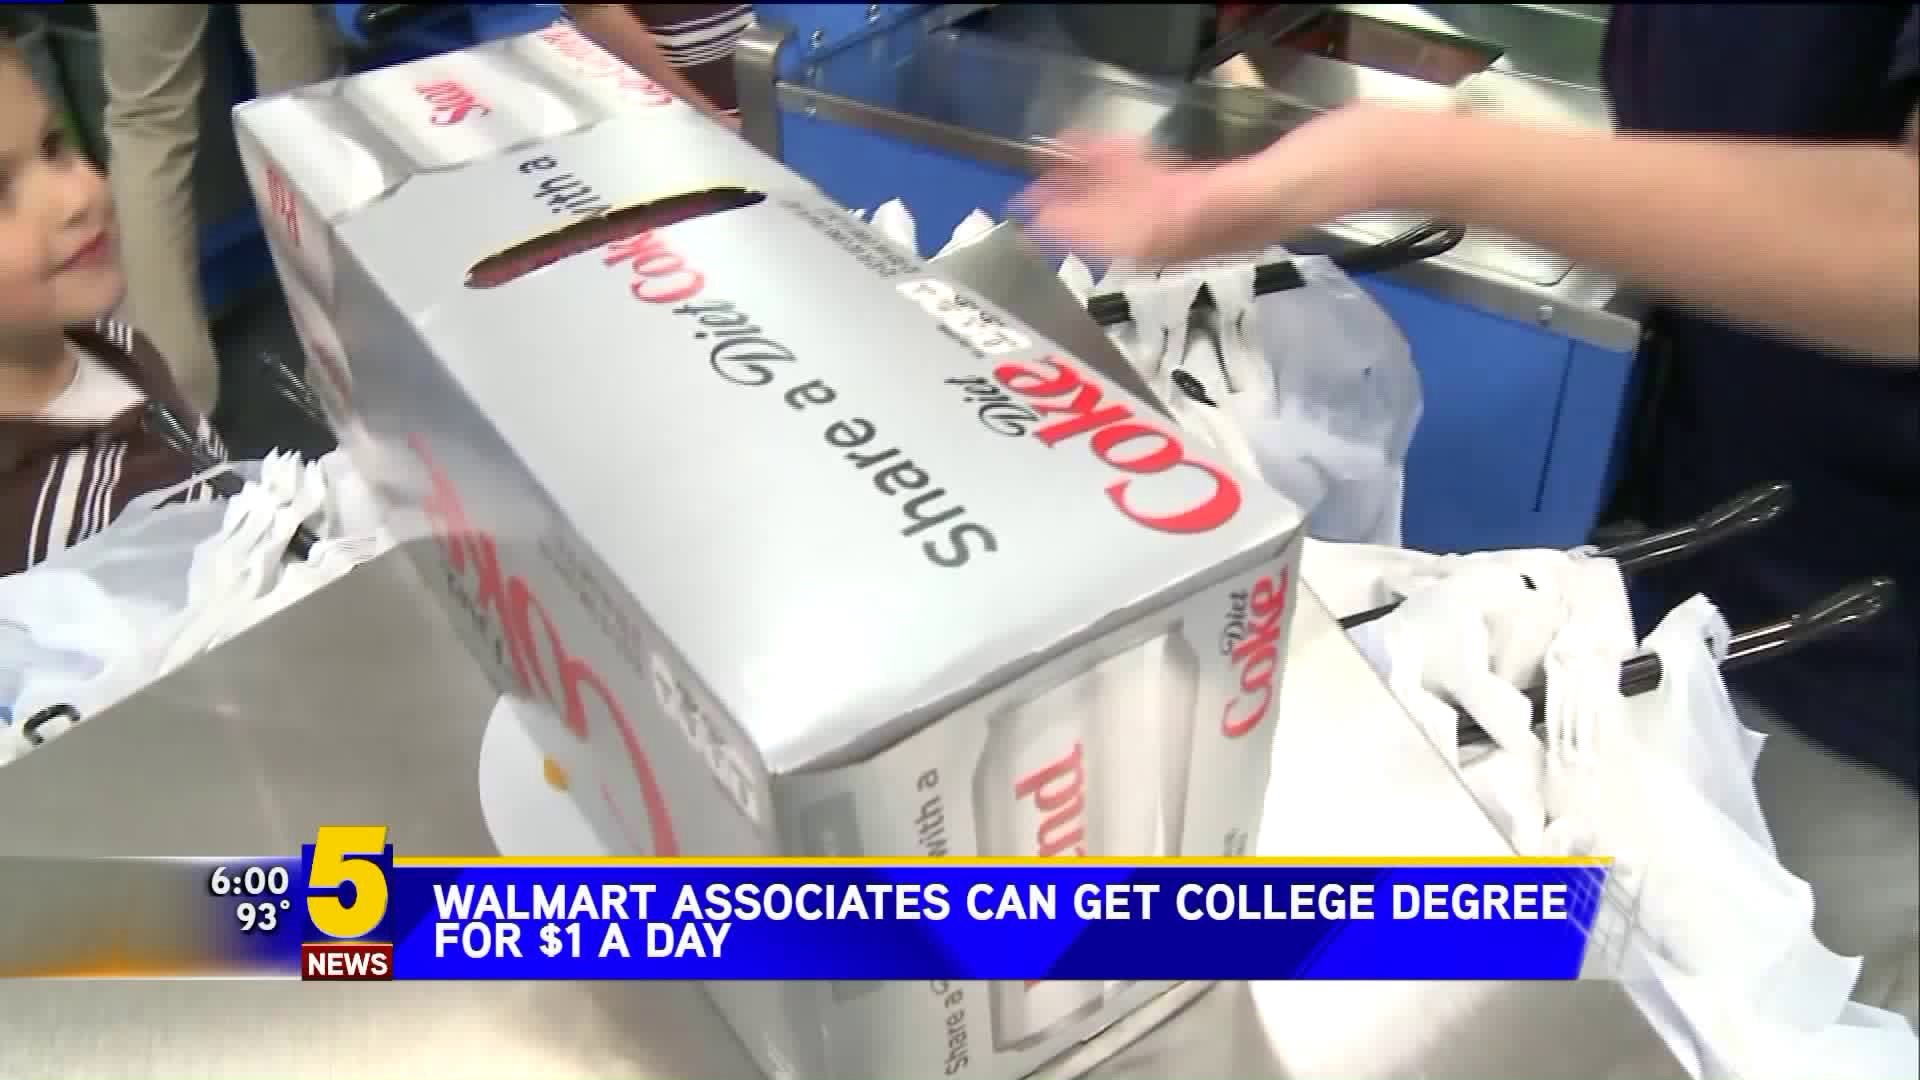 Walmart Associates Can Get College Degree For $1 A Day